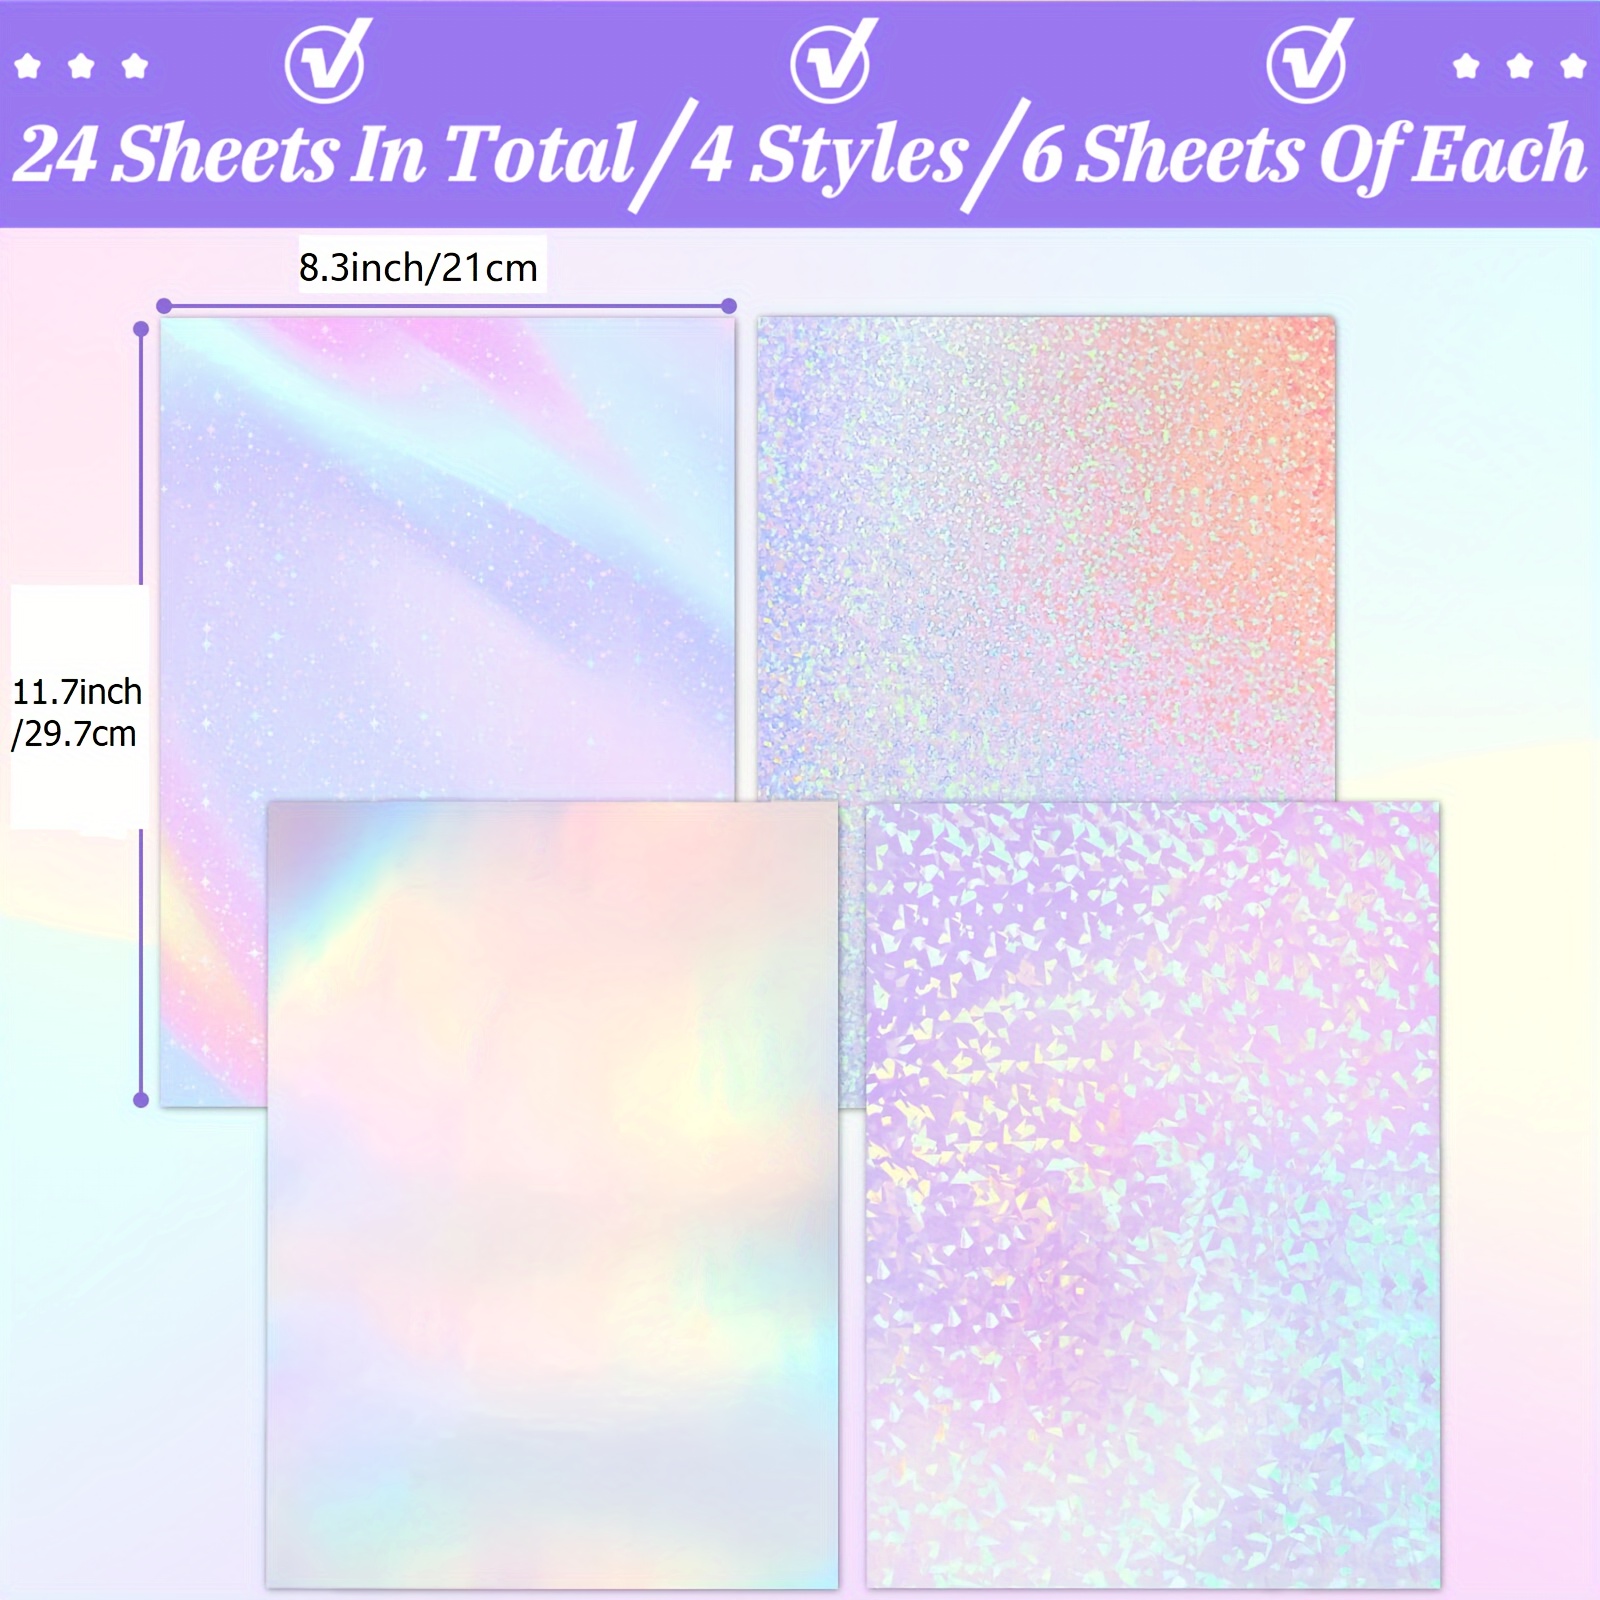 20Sheets Holographic Sticker Paper Clear A4 Vinyl Sticker Paper  Self-Adhesive Waterproof Transparent Film with Gem Spot Rainbow Star  Patterns, 11.7 x 8.3 Inch (Gem, Dot, Colorful, Star)